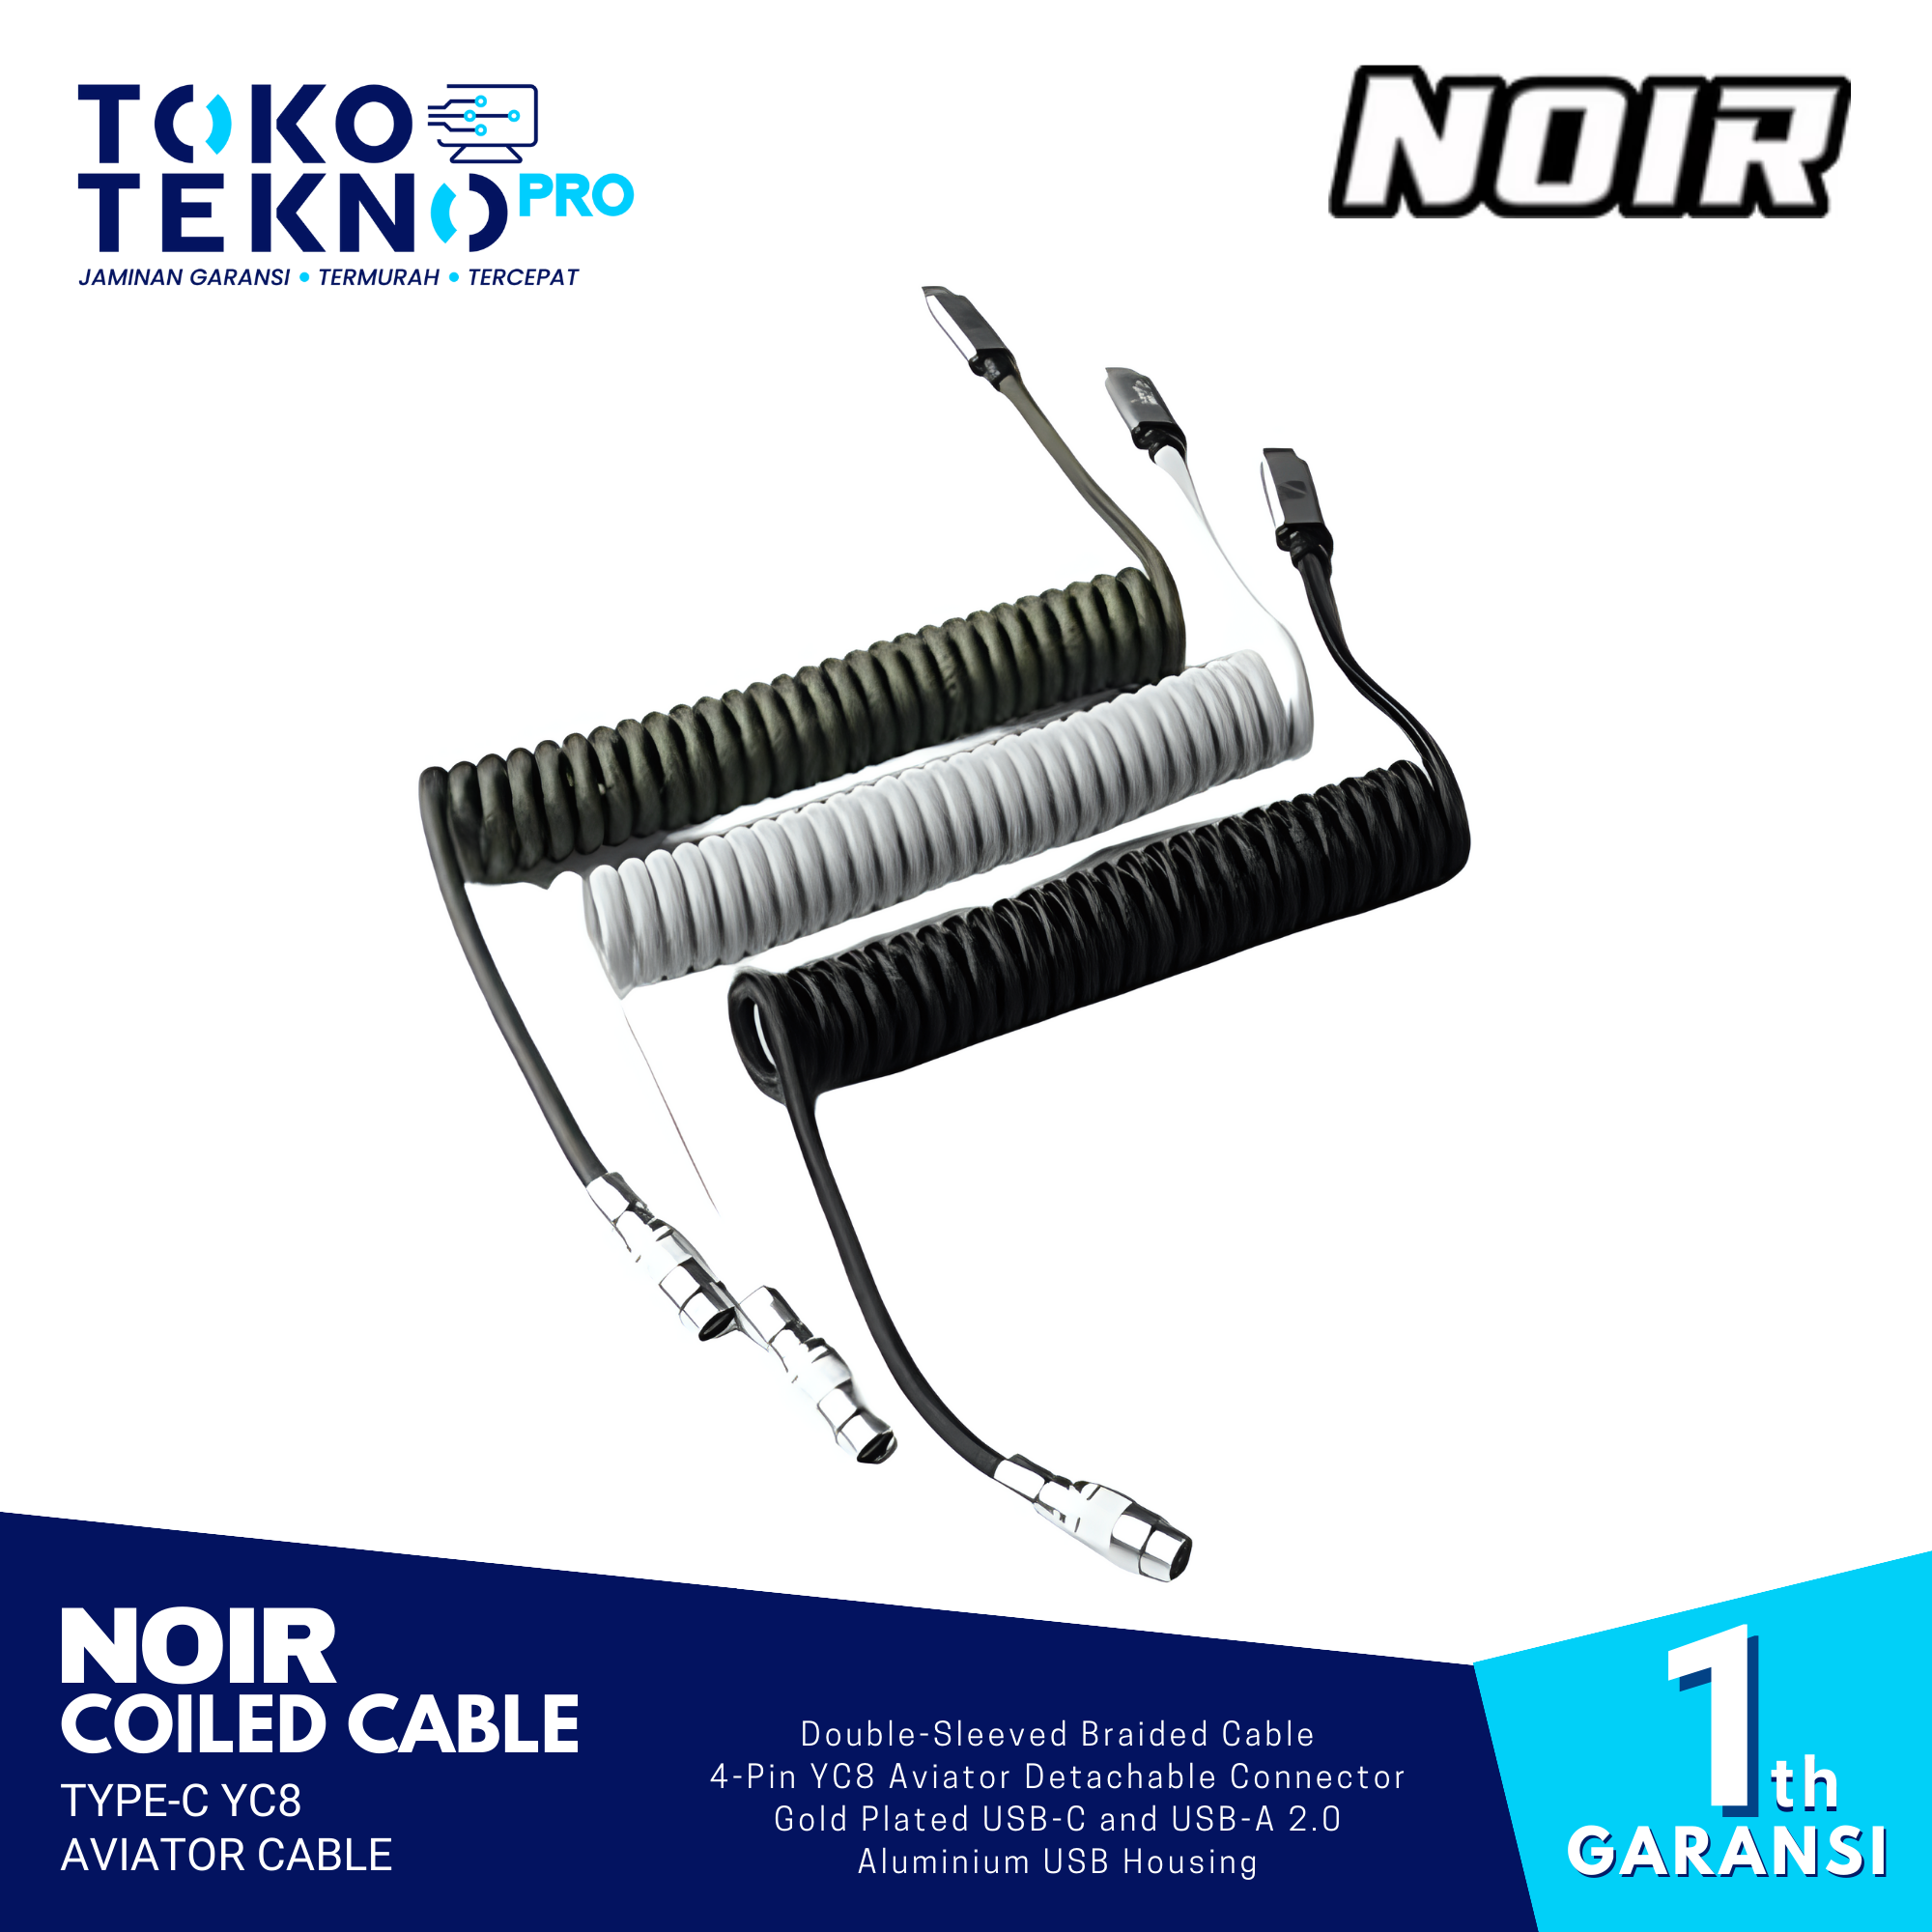 Noir Coiled Cable Aviator TypeC YC8 Aviator Cable